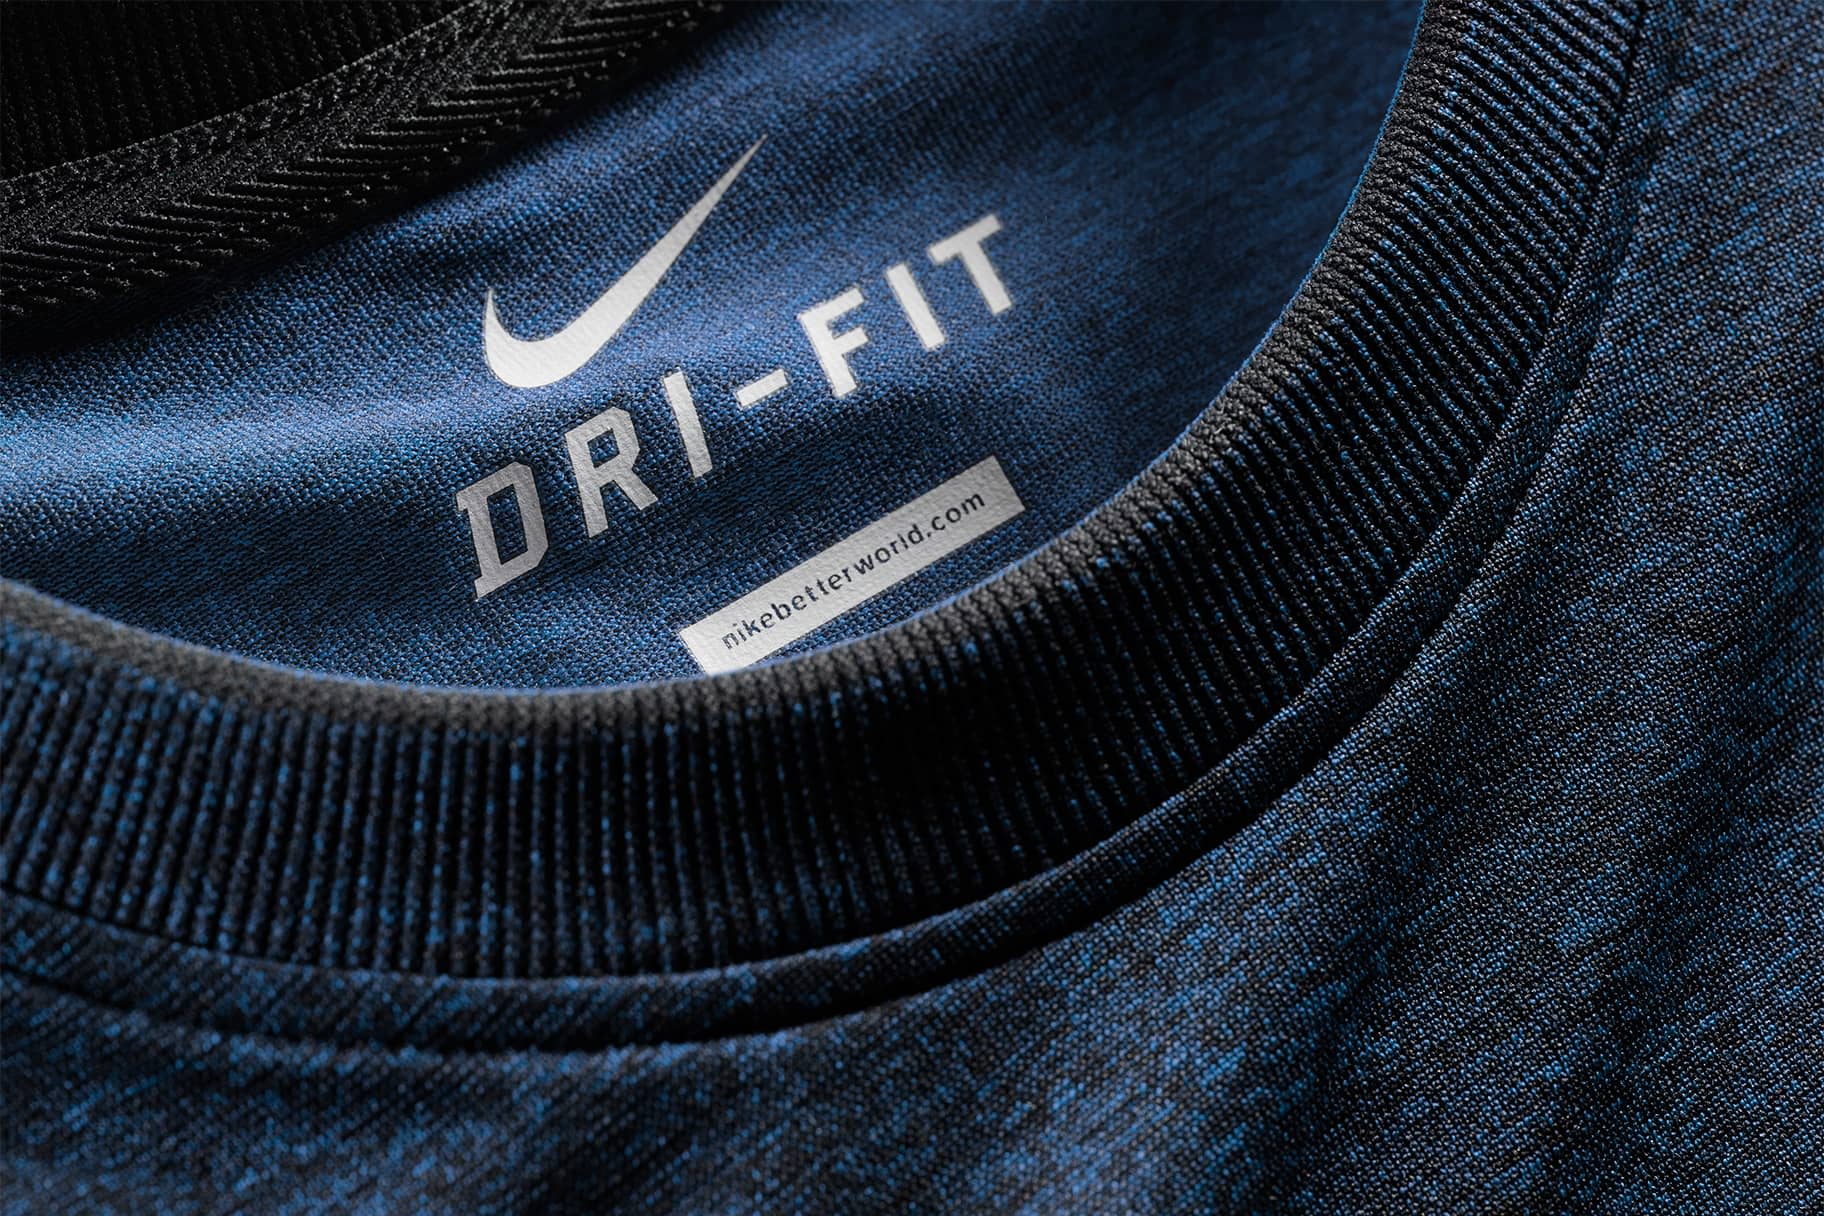 The best workout tops by Nike